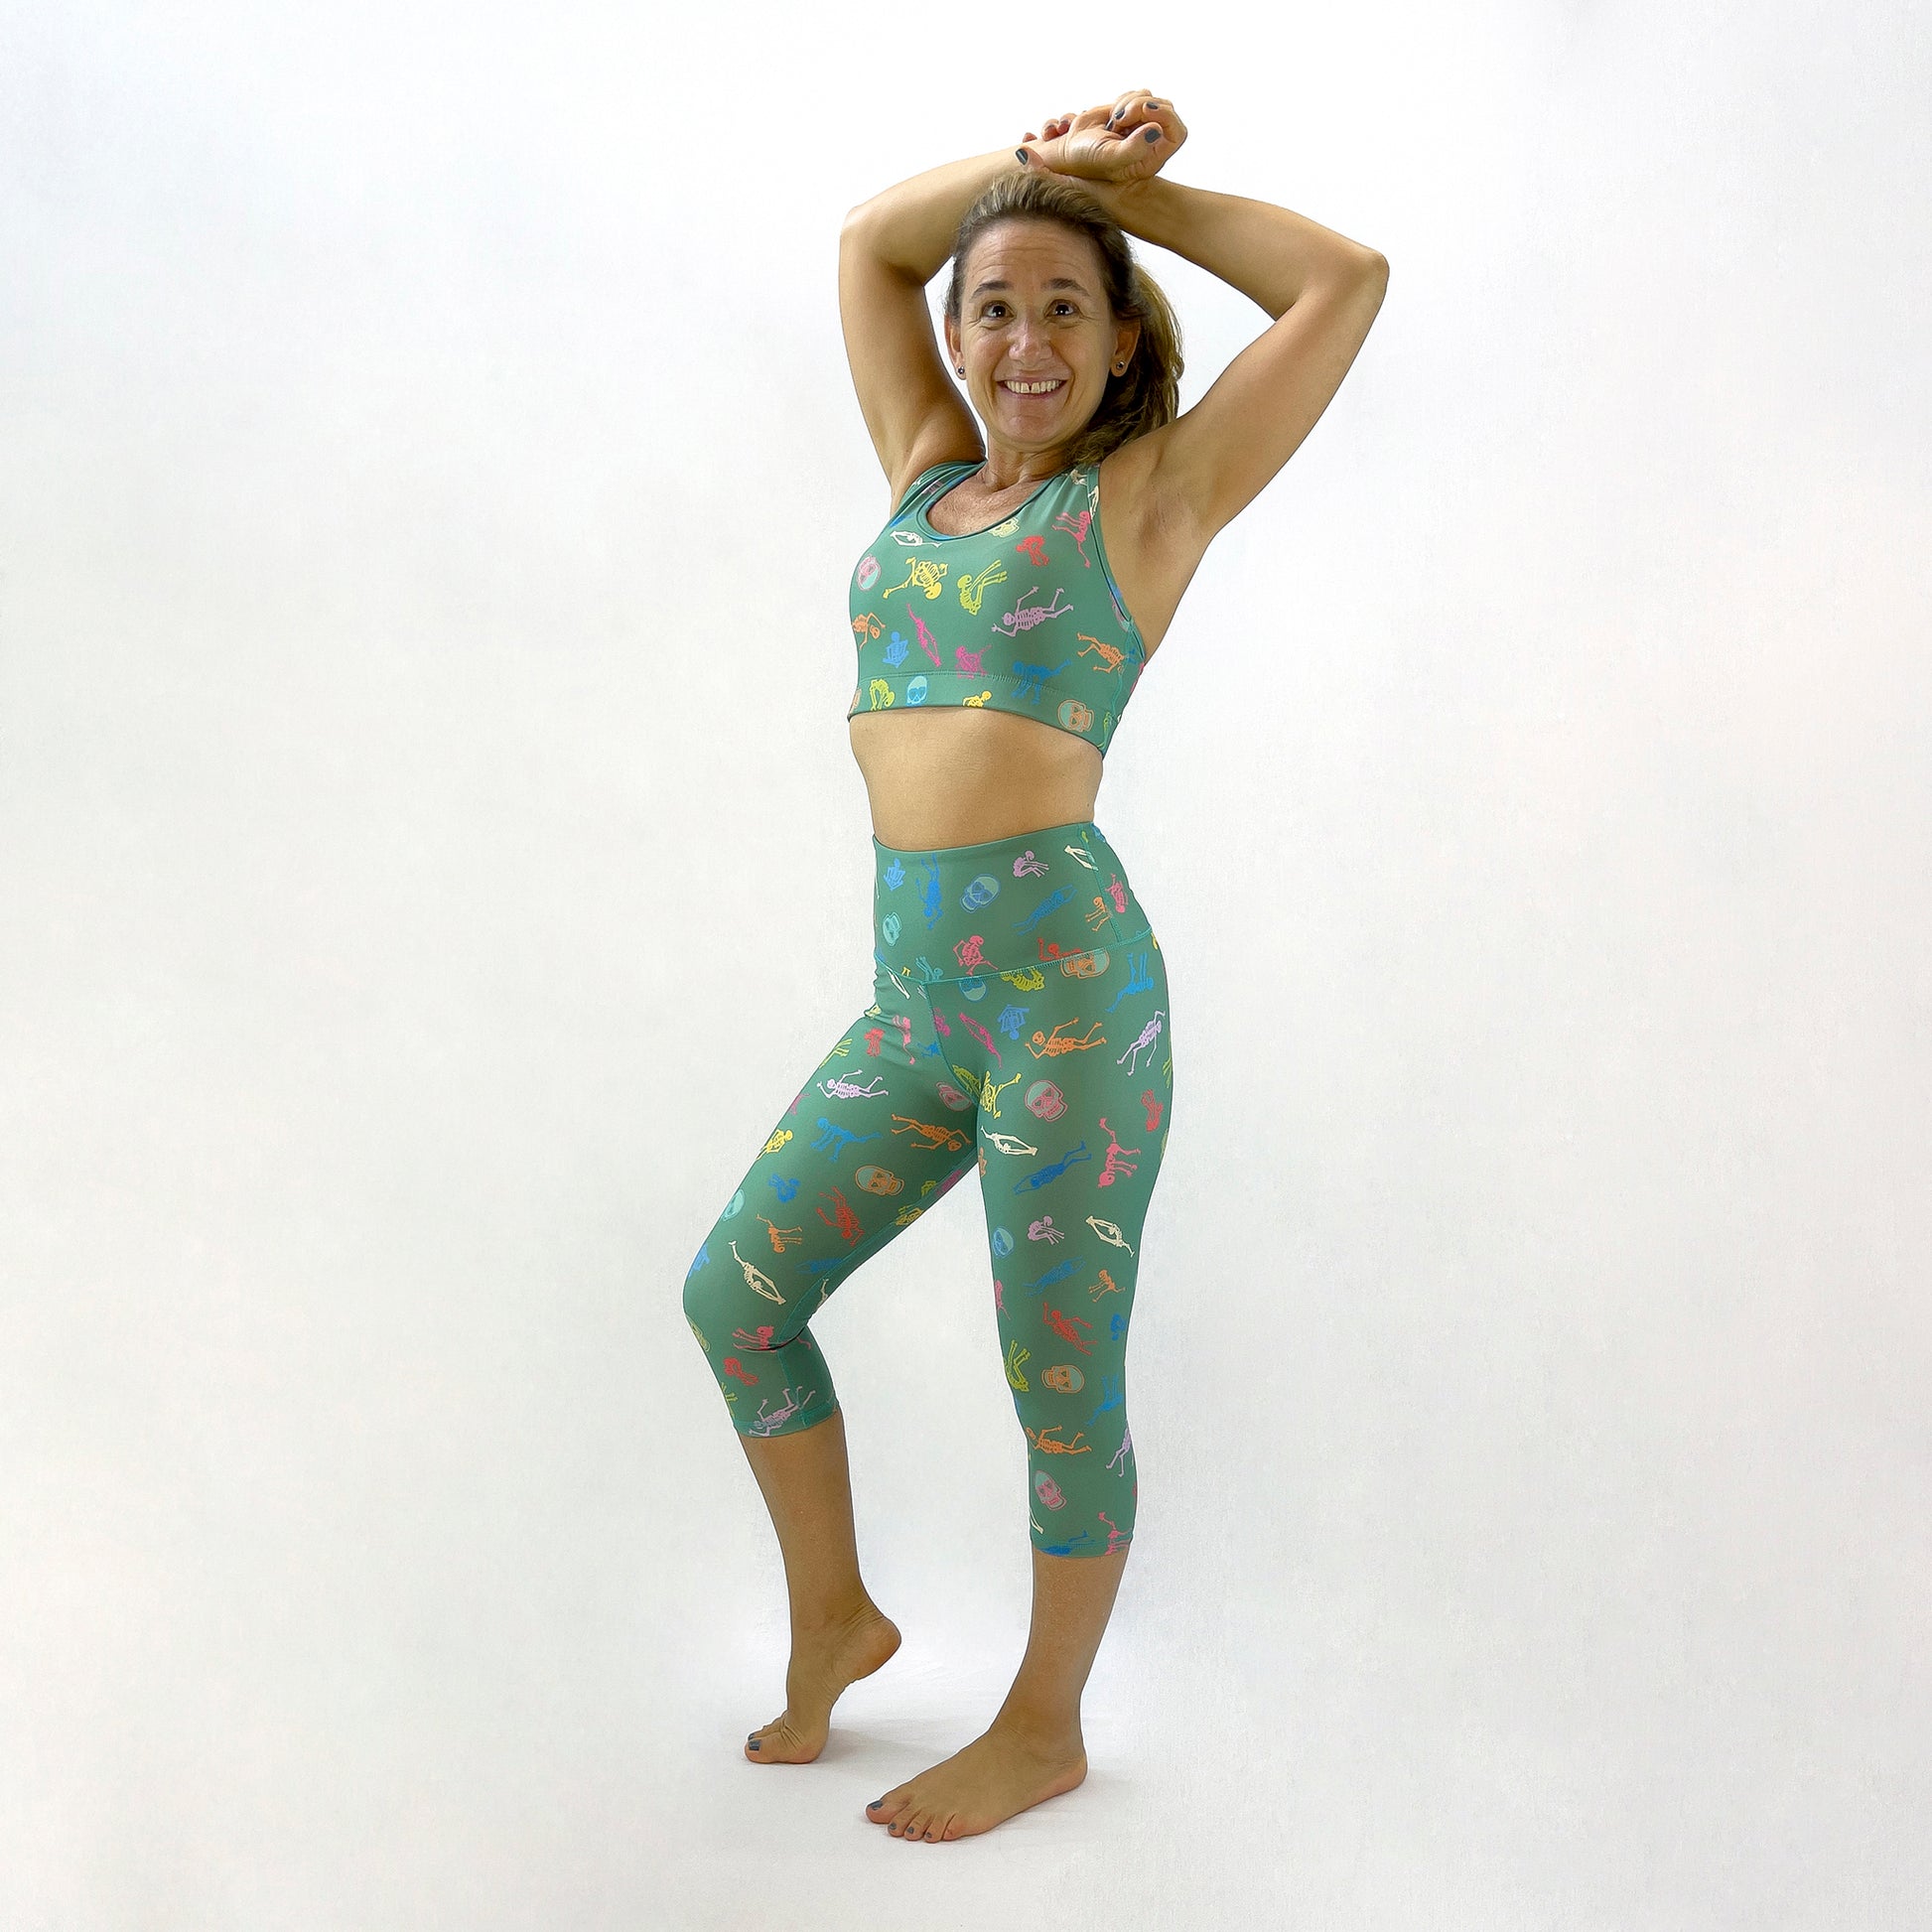 colourful sports bra sustainably made with recycled materials - Alive! full body shot